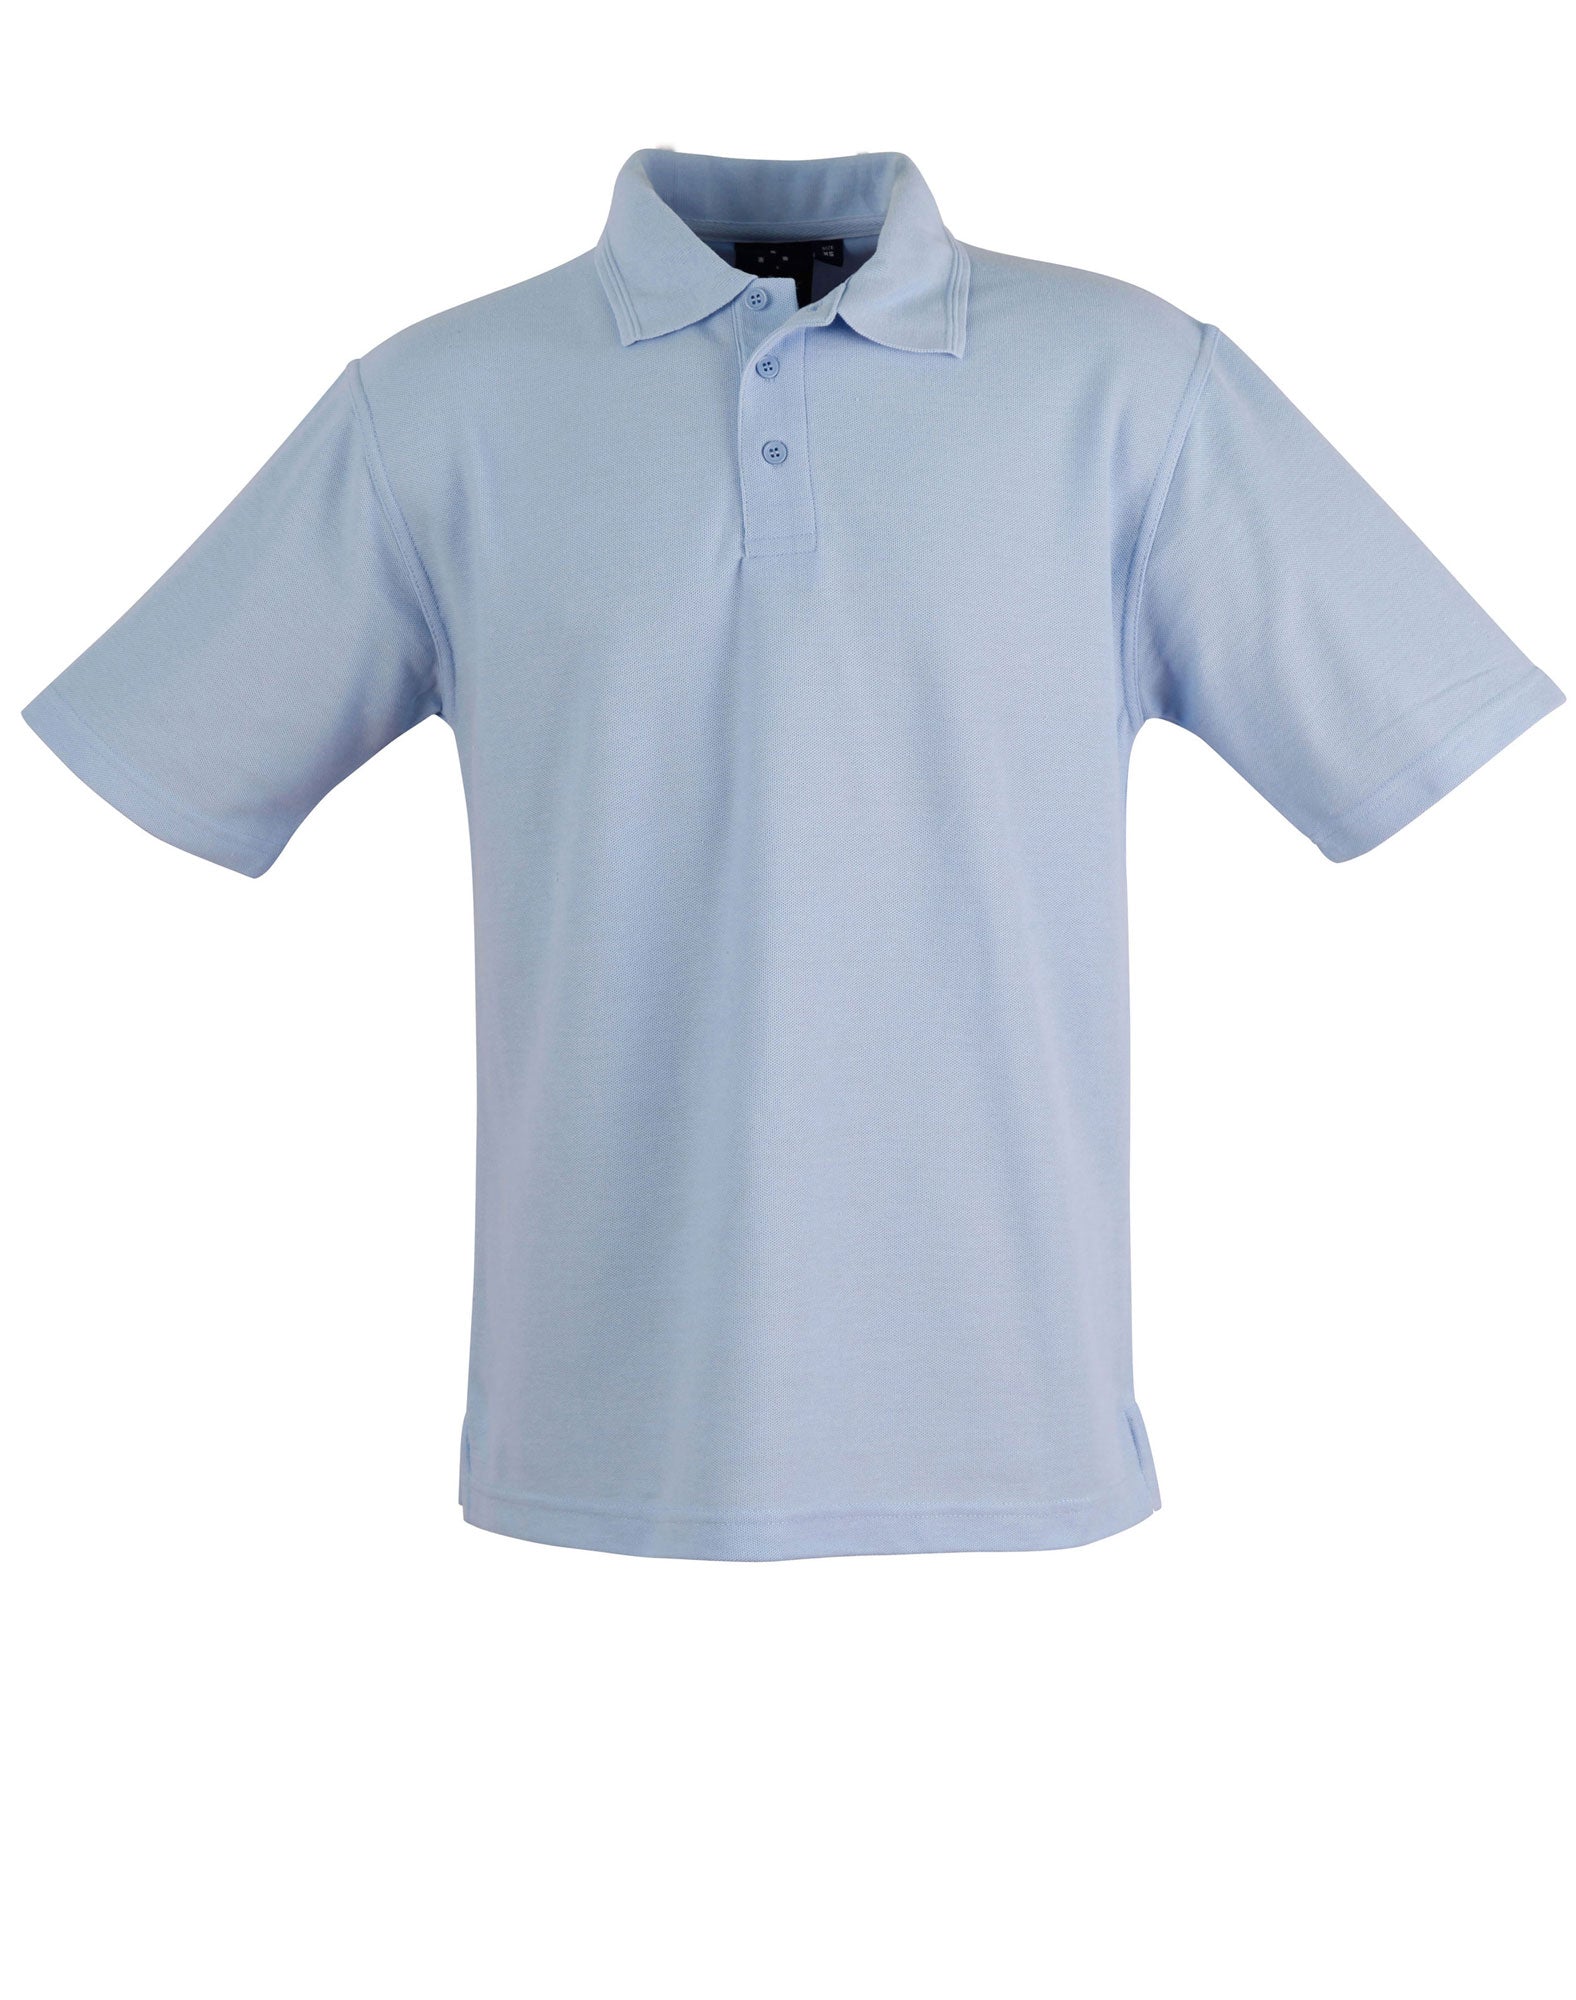 Poly Cotton Pique Polo Shirt - made by AIW